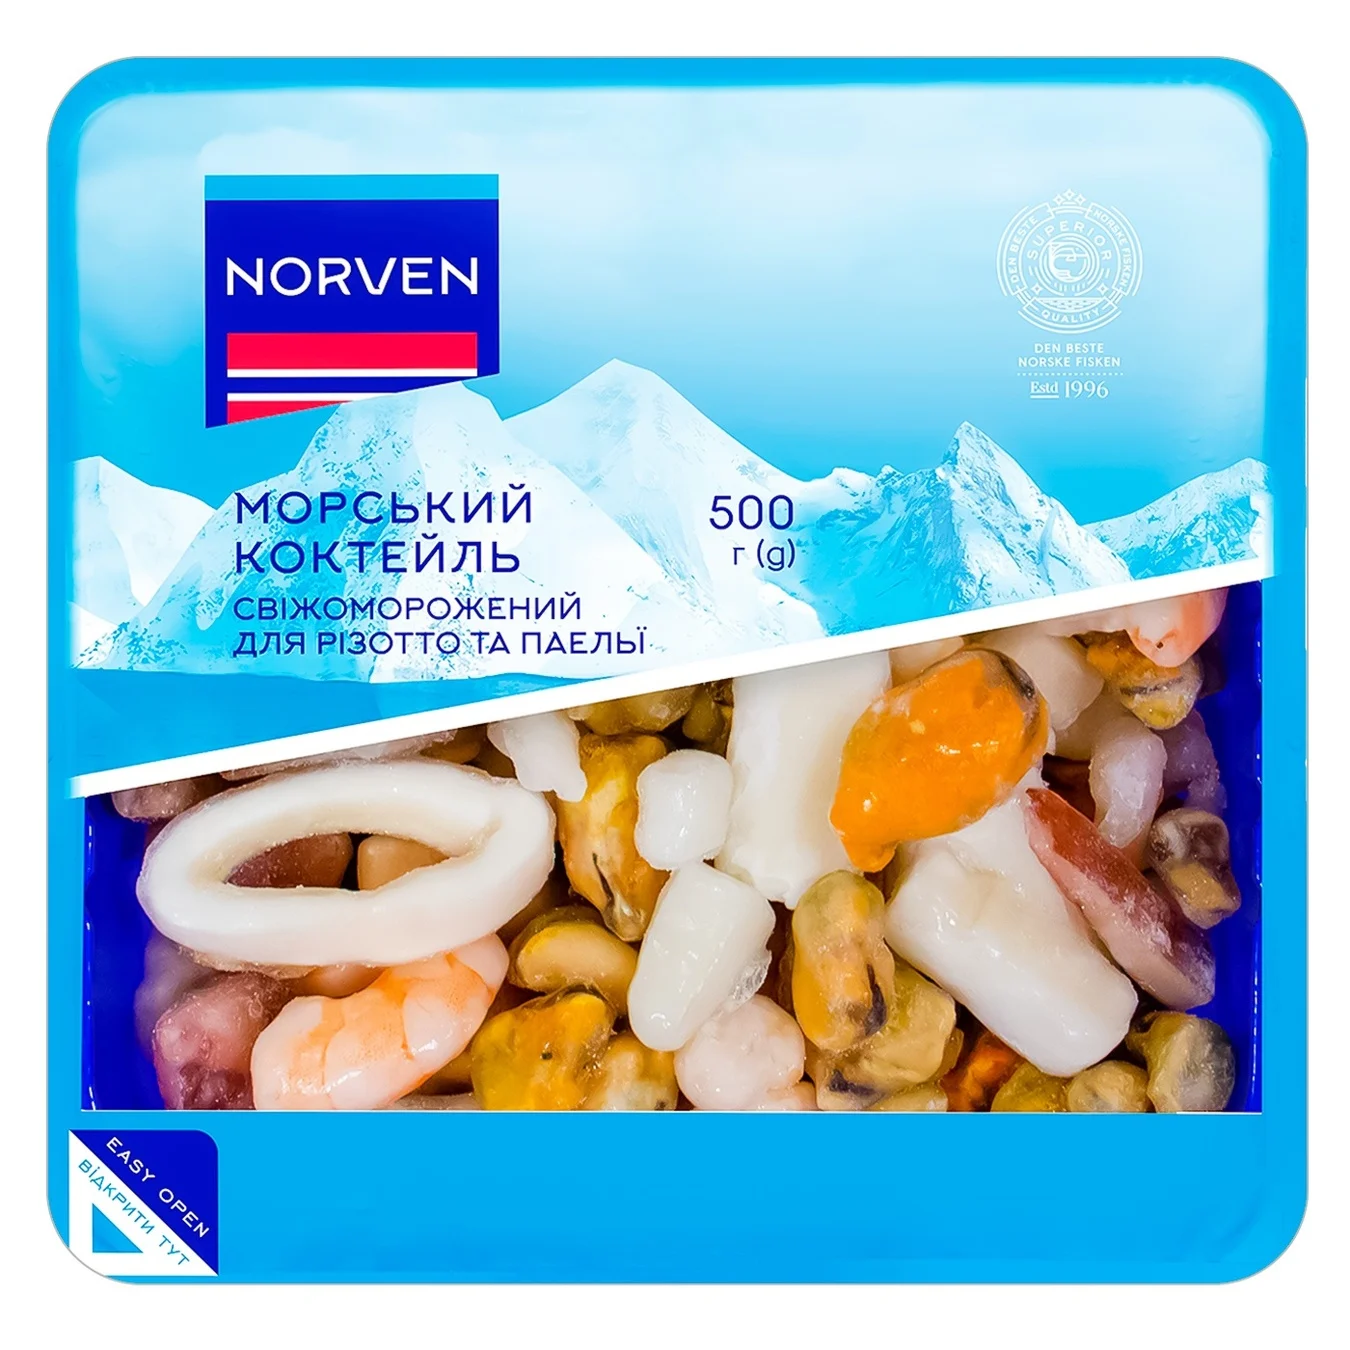 Sea cocktail Norven for risotto and paella fresh frozen 500g